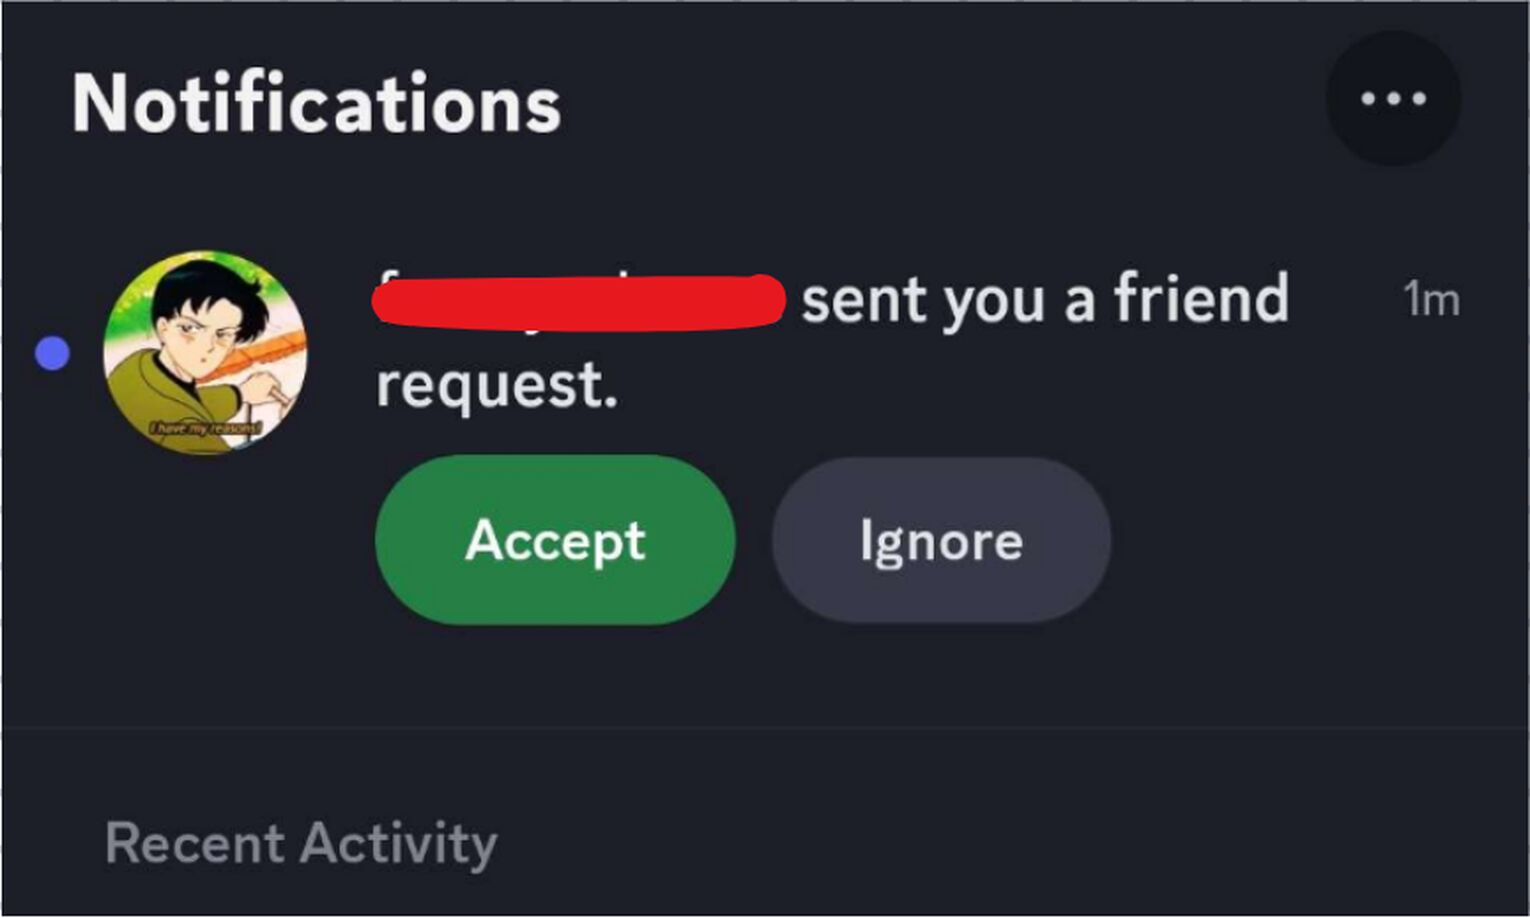 Tap “Accept” To Accept The Friend Request